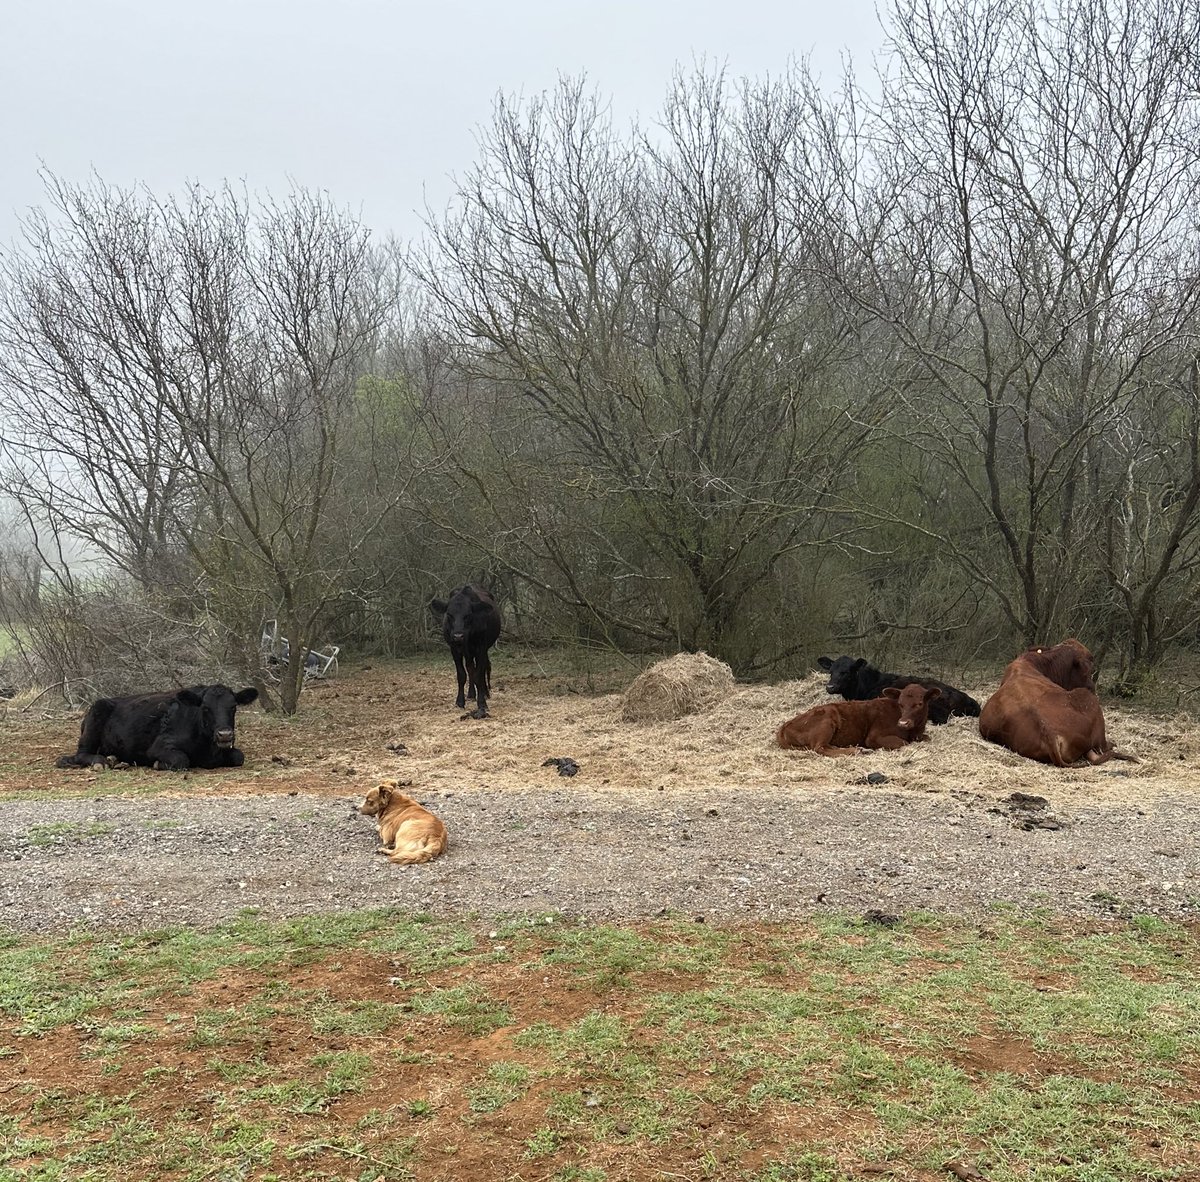 Good morning from the cows and Brownie 

Can’t really tell in the pic, but it’s been a foggy morning here in #SouthTexas